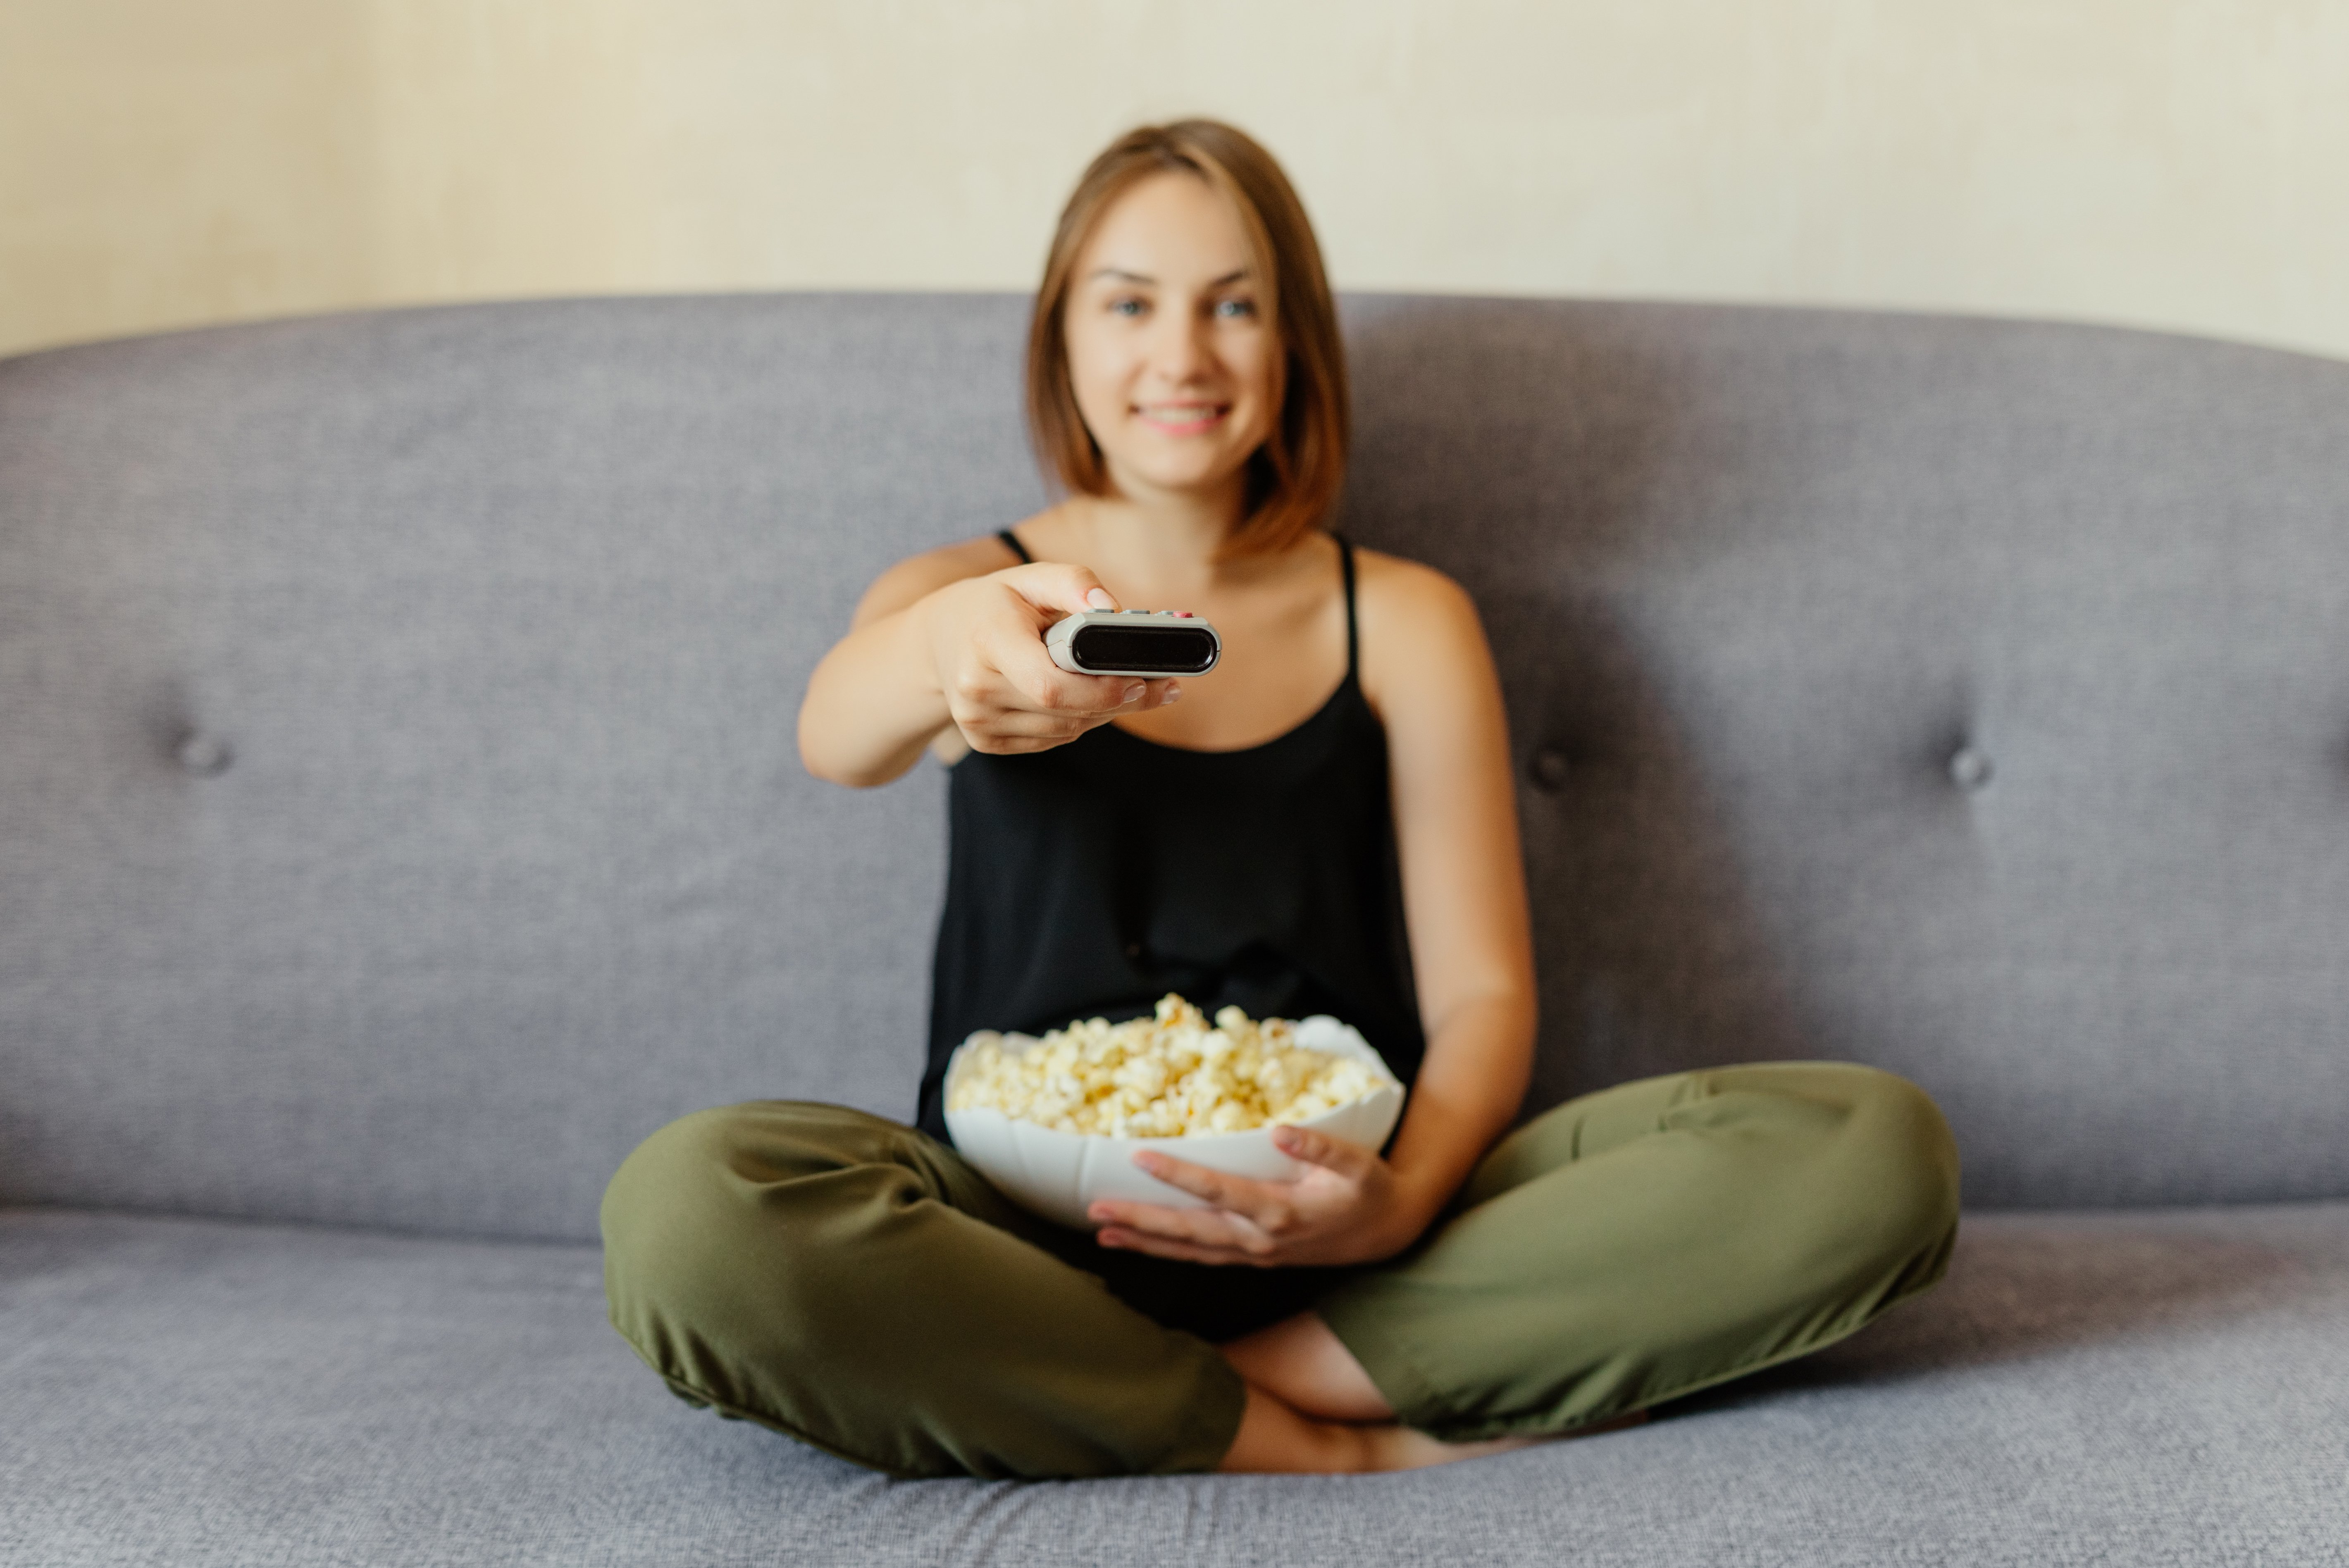 cheerful-attractive-girl-with-popcorn-sitting-sofa-watching-tv-changing-channels-with-remote-control-eating-popcorn-home